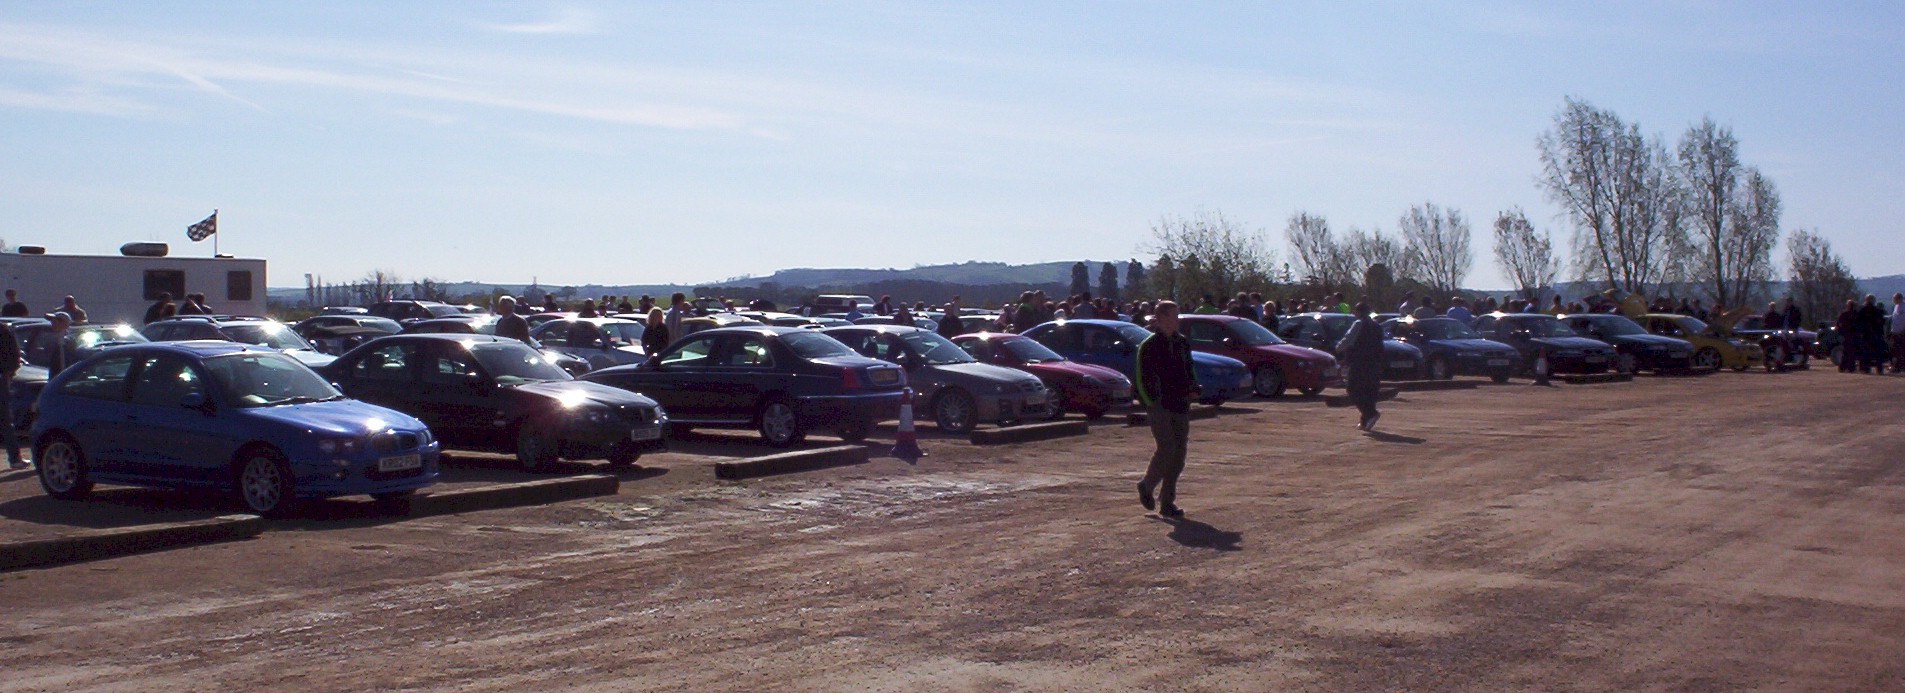 By the time the convoy sets off, the car park is full.